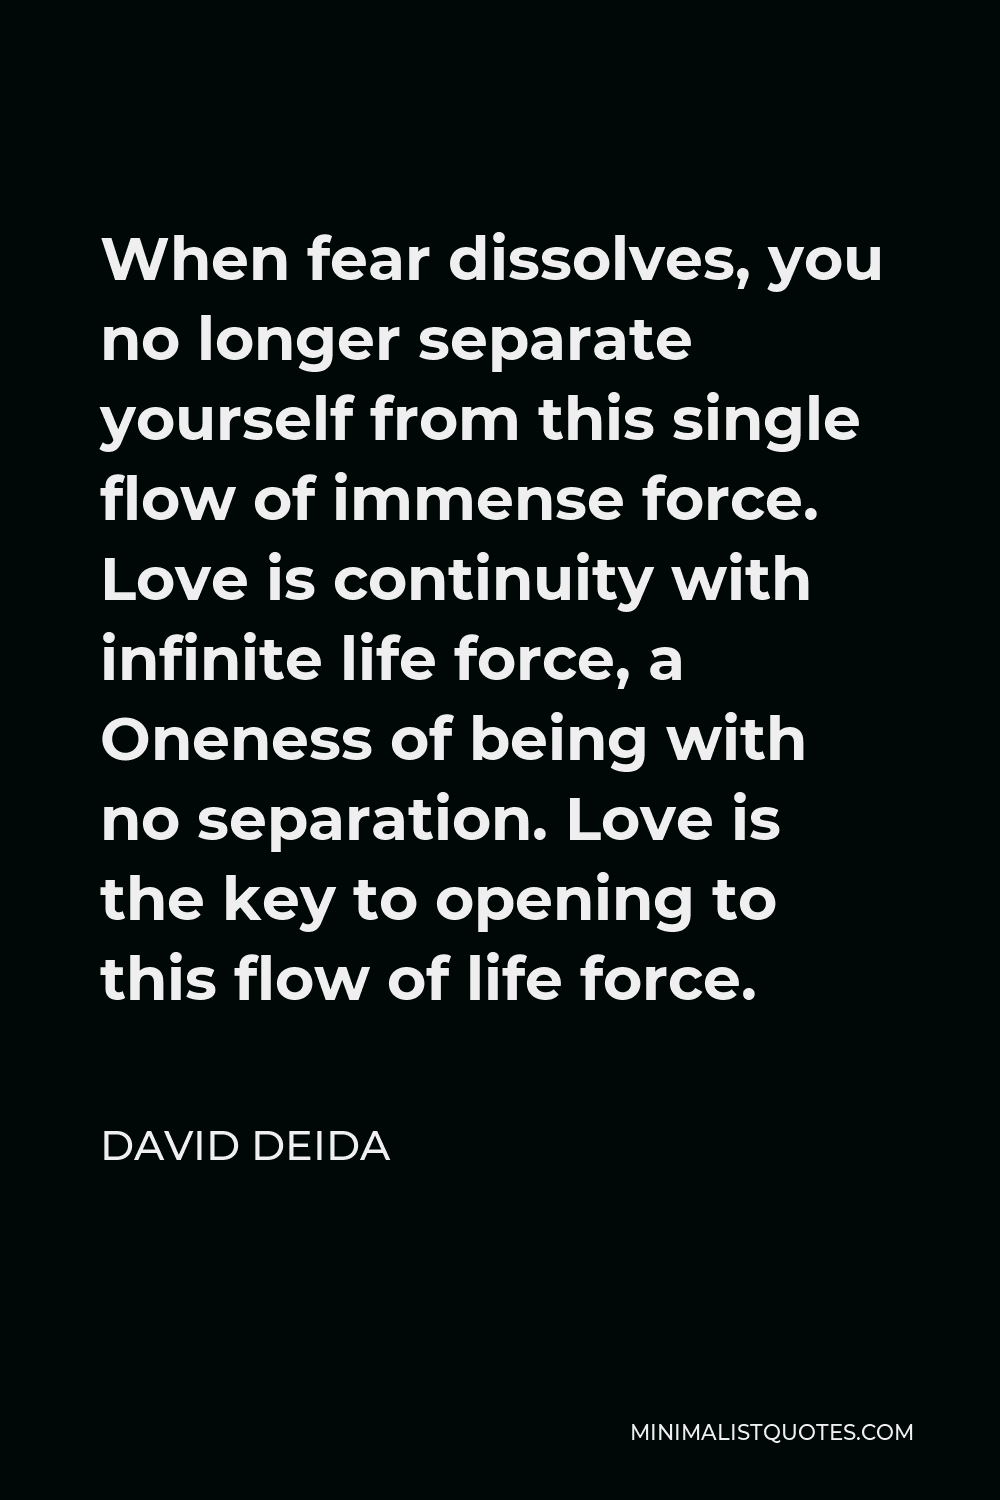 David Deida Quote - When fear dissolves, you no longer separate yourself from this single flow of immense force. Love is continuity with infinite life force, a Oneness of being with no separation. Love is the key to opening to this flow of life force.